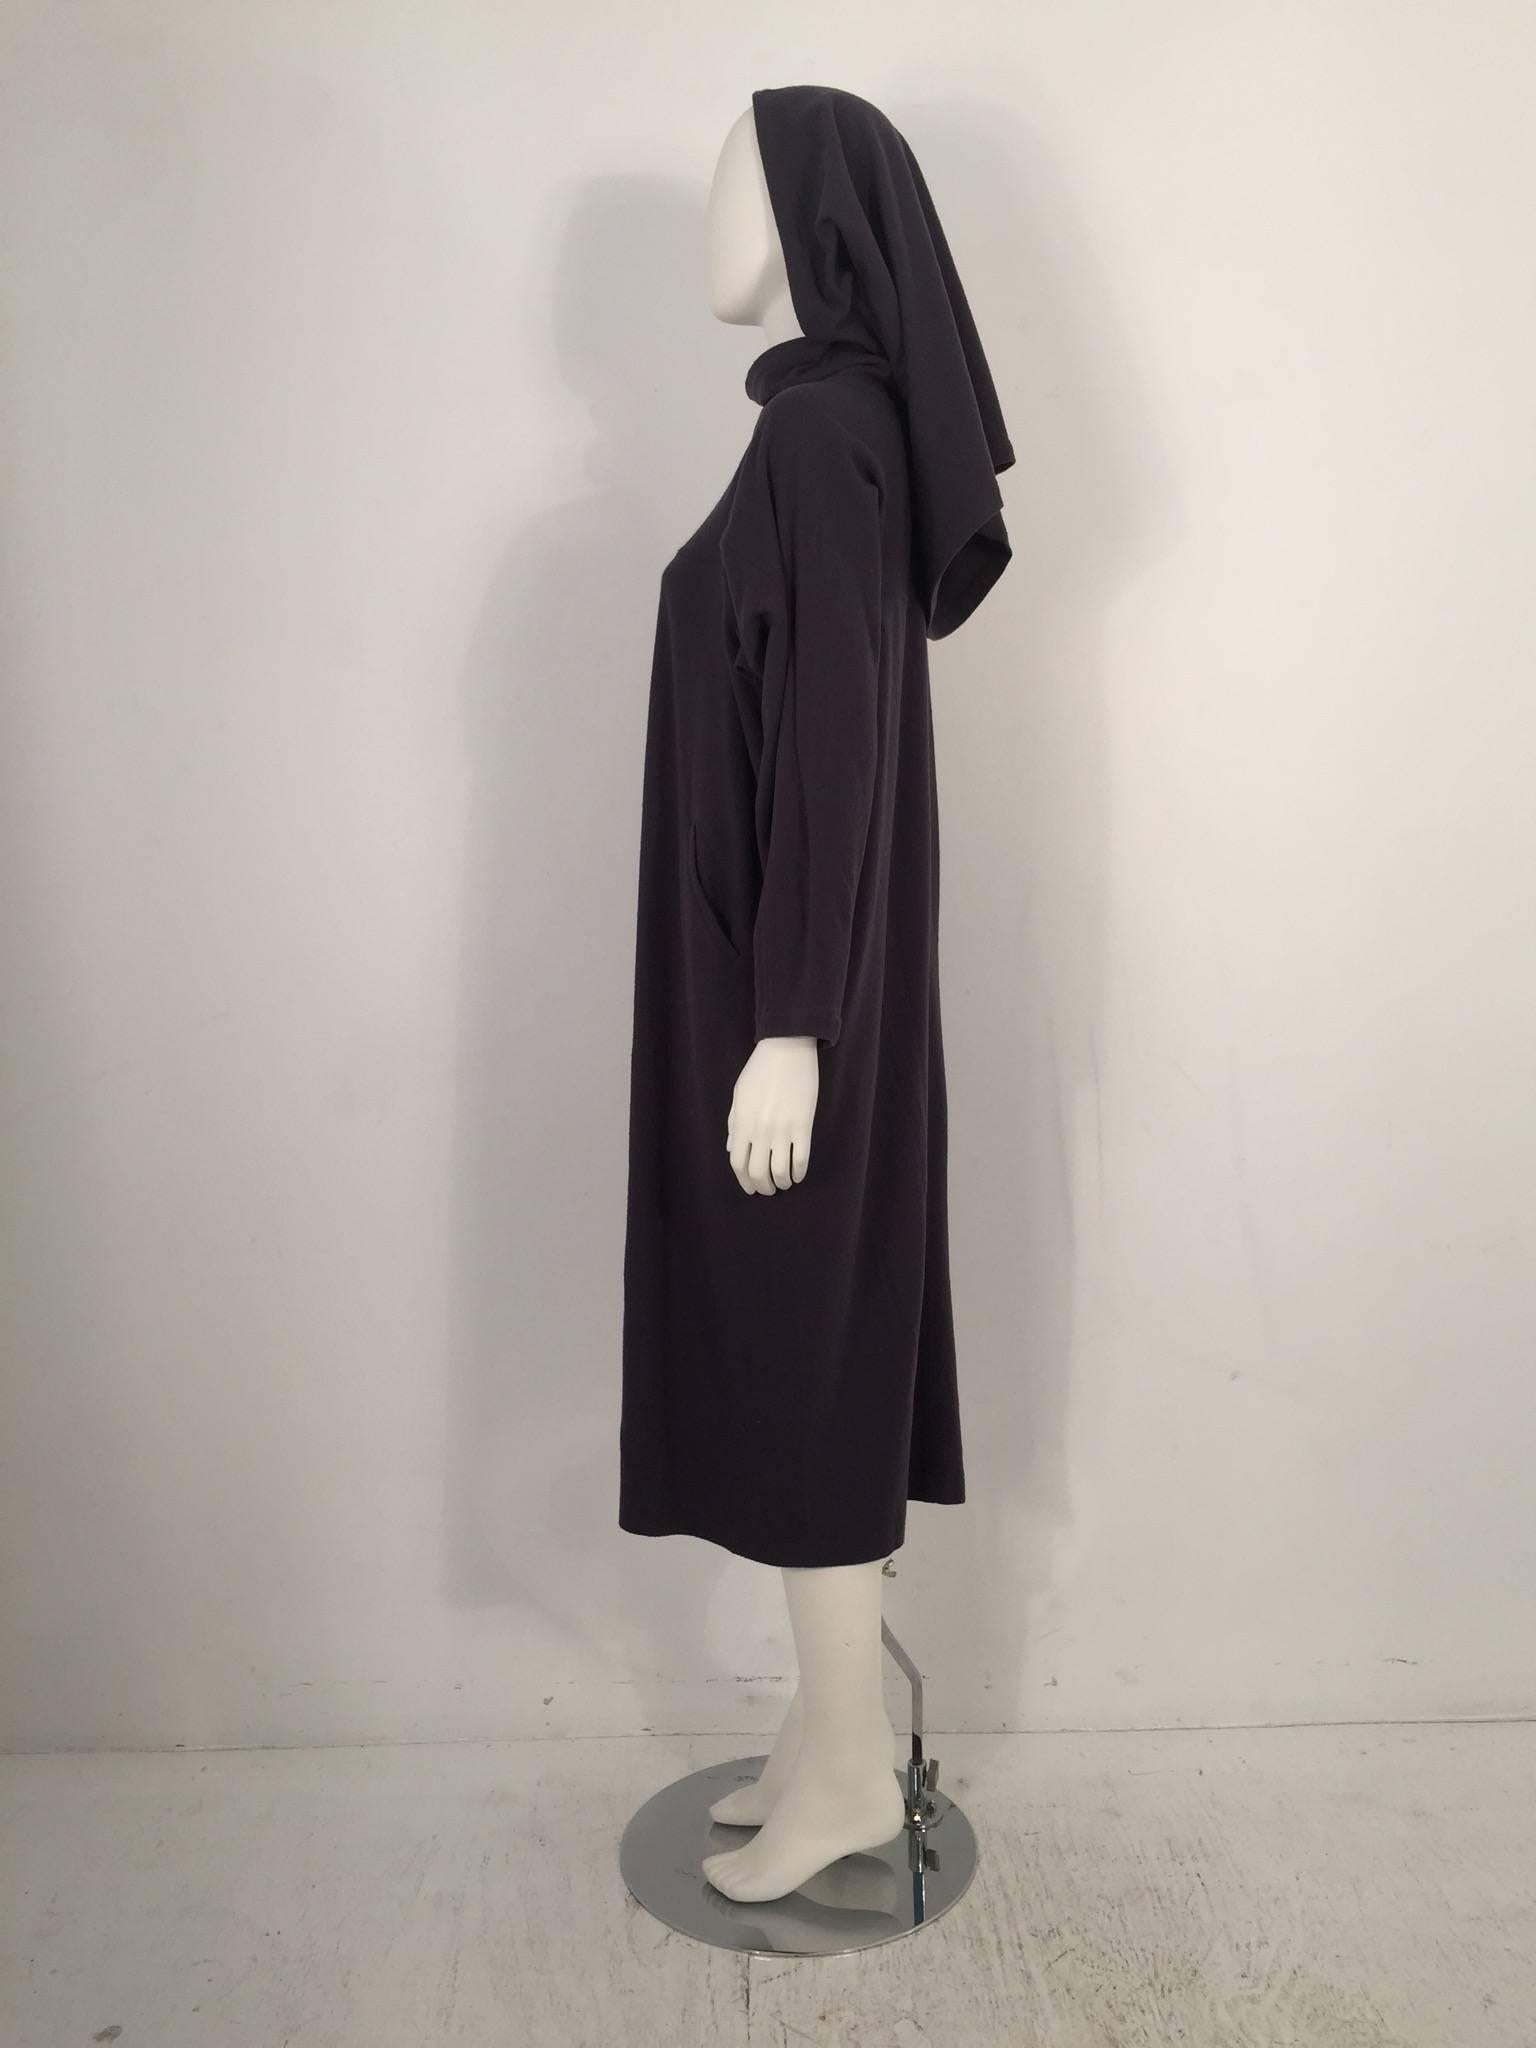 Black Issey Miyake Iconic Hooded Dress For Sale